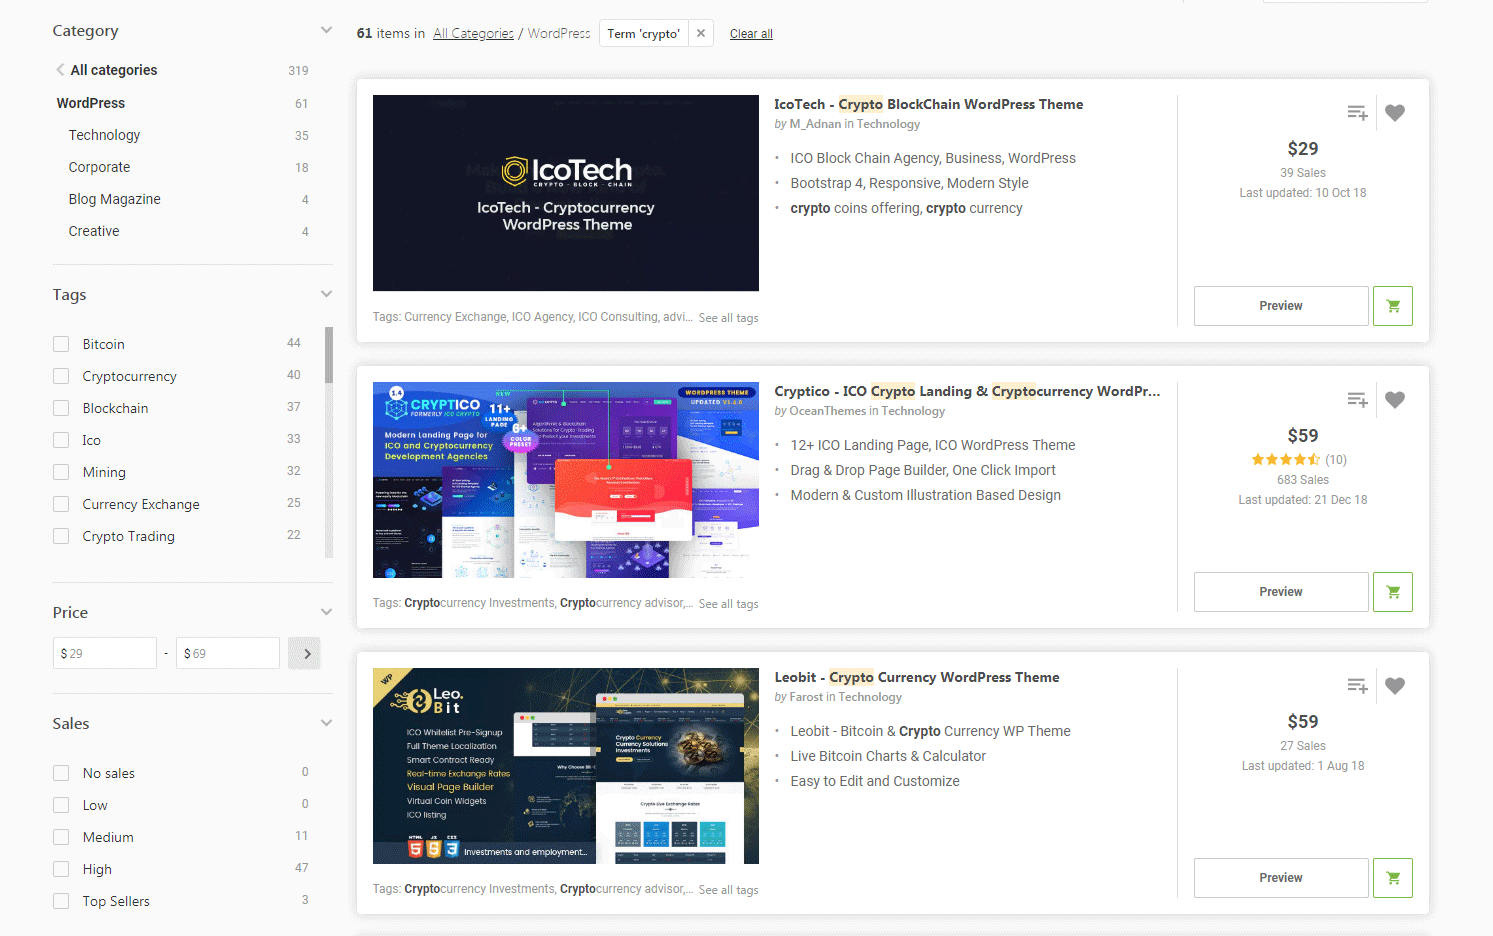 Widely available cryptocurrency themed website themes. Initial coin offering scam.